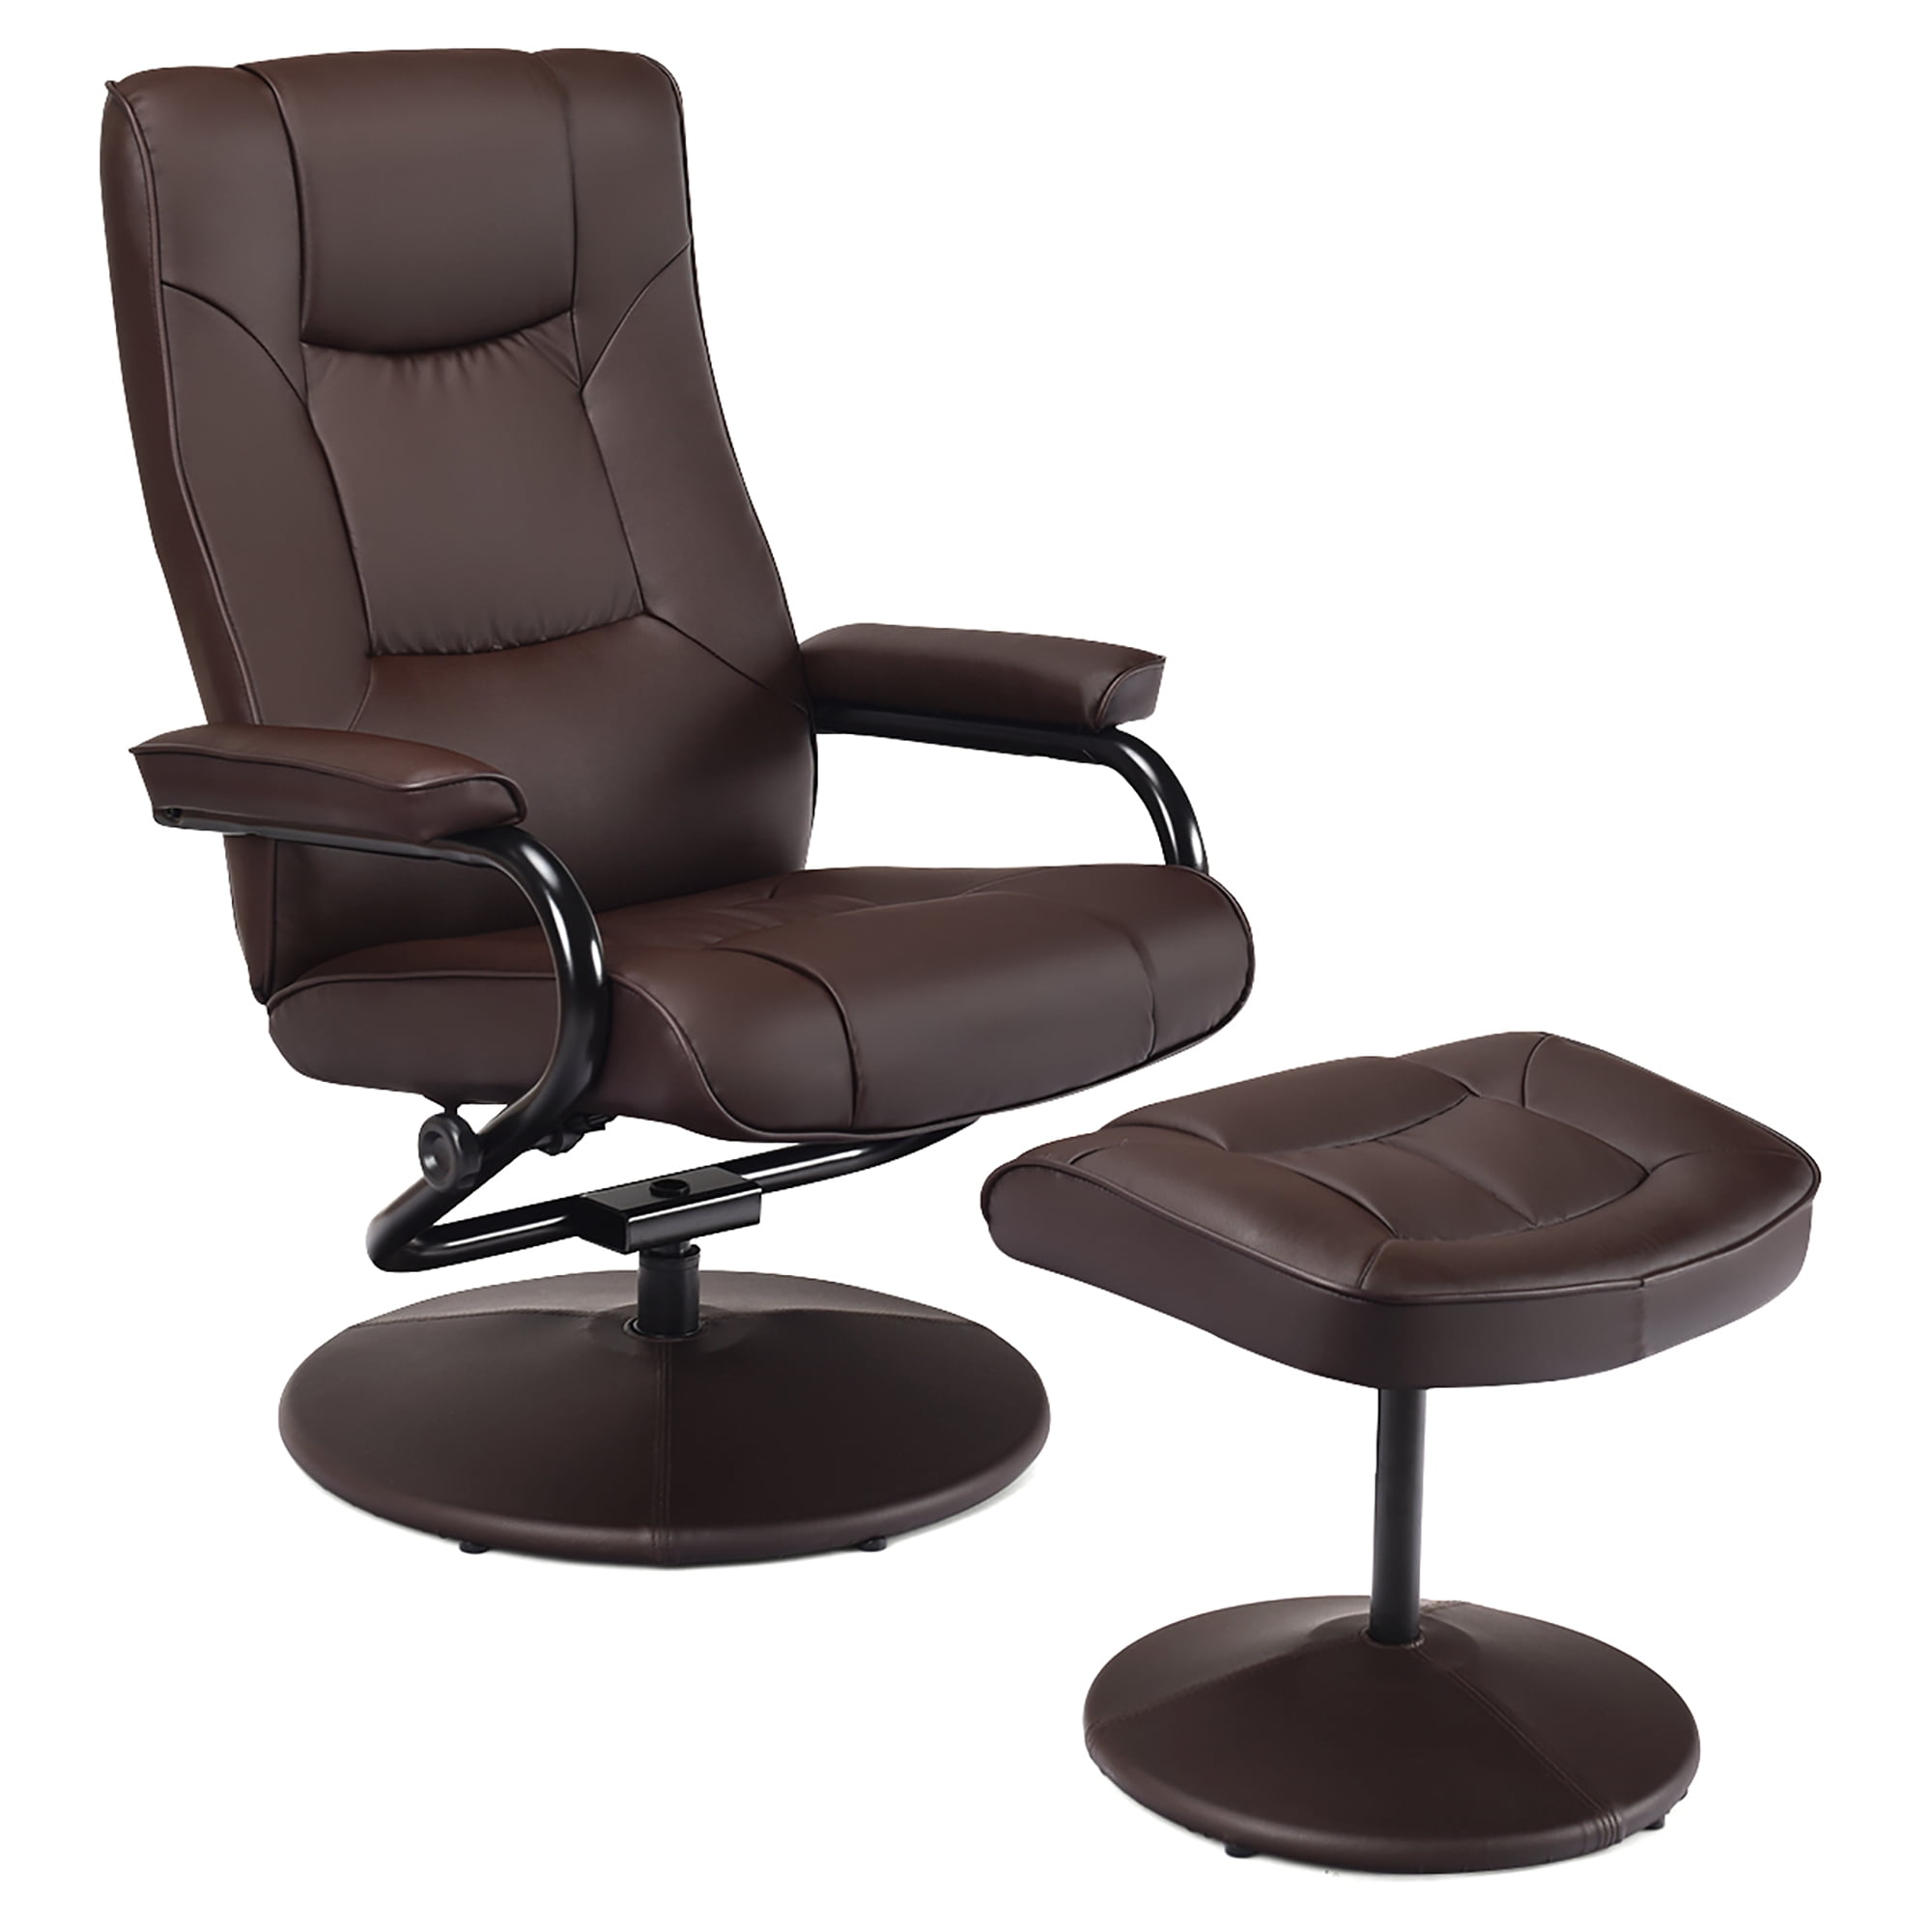 Costway Recliner Chair Swivel Pu, Leather Lounge Chairs Recliners